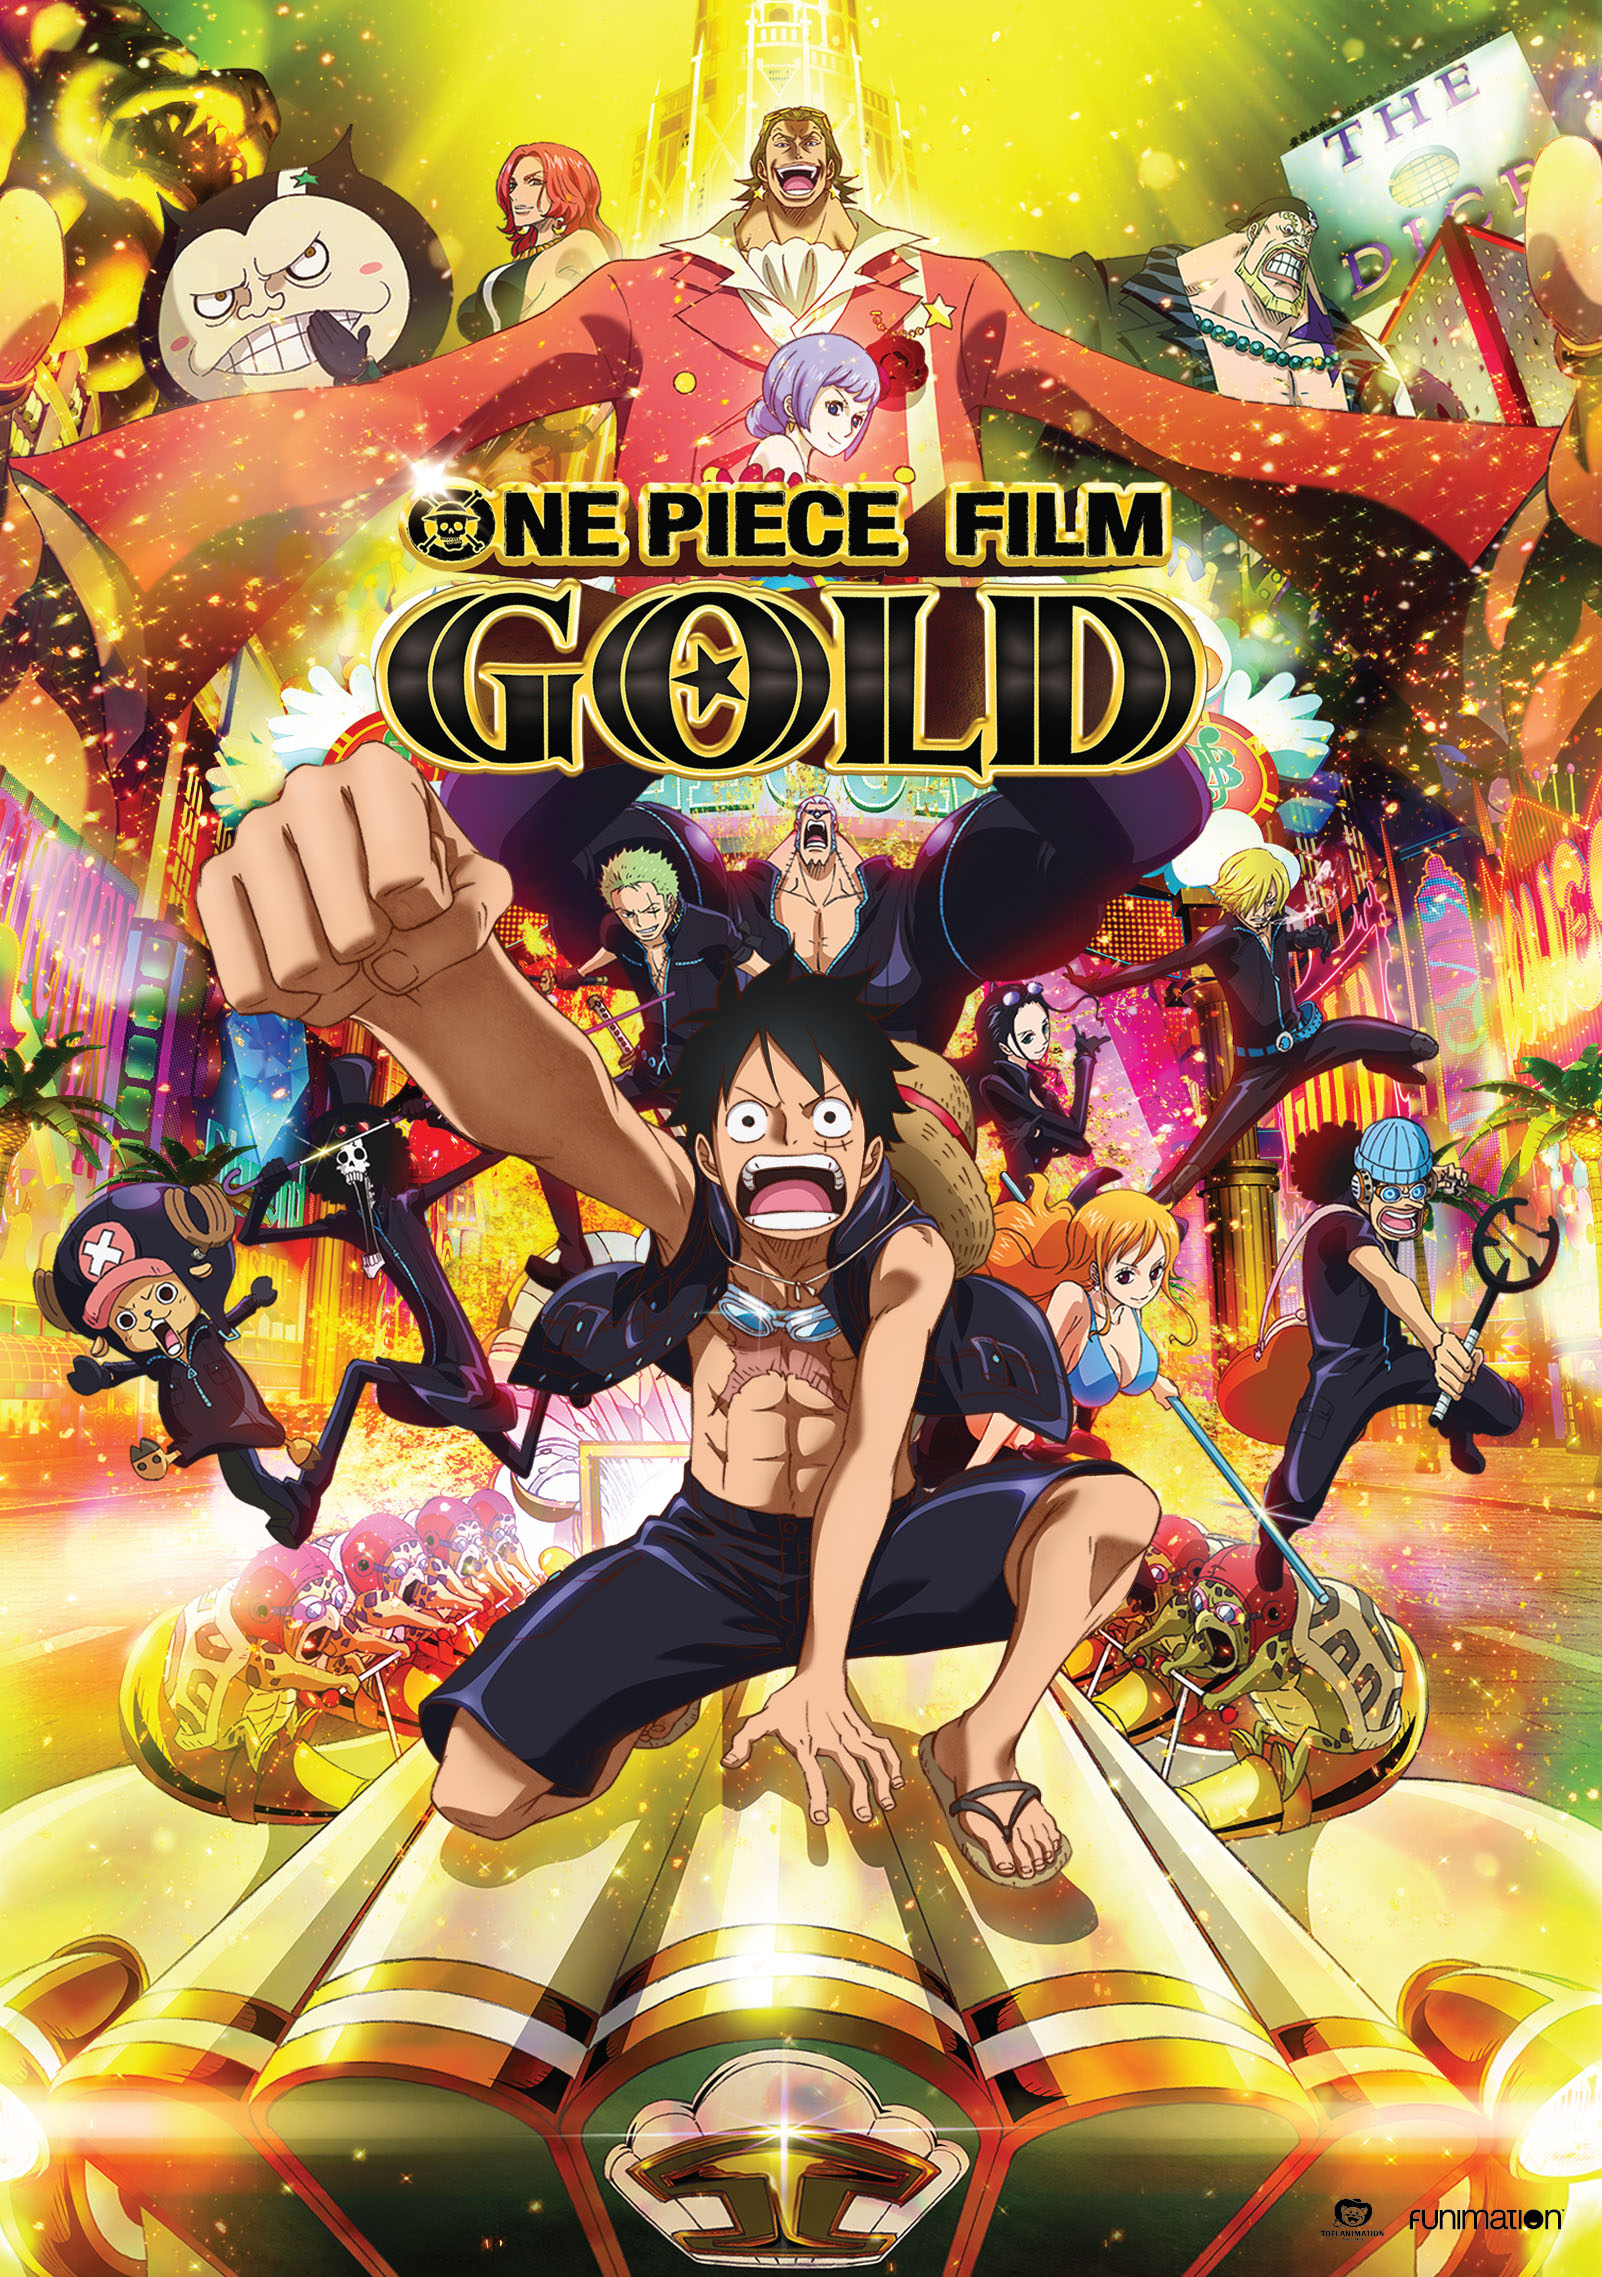 Is Movie 'One Piece Film: Gold 2016' streaming on Netflix?